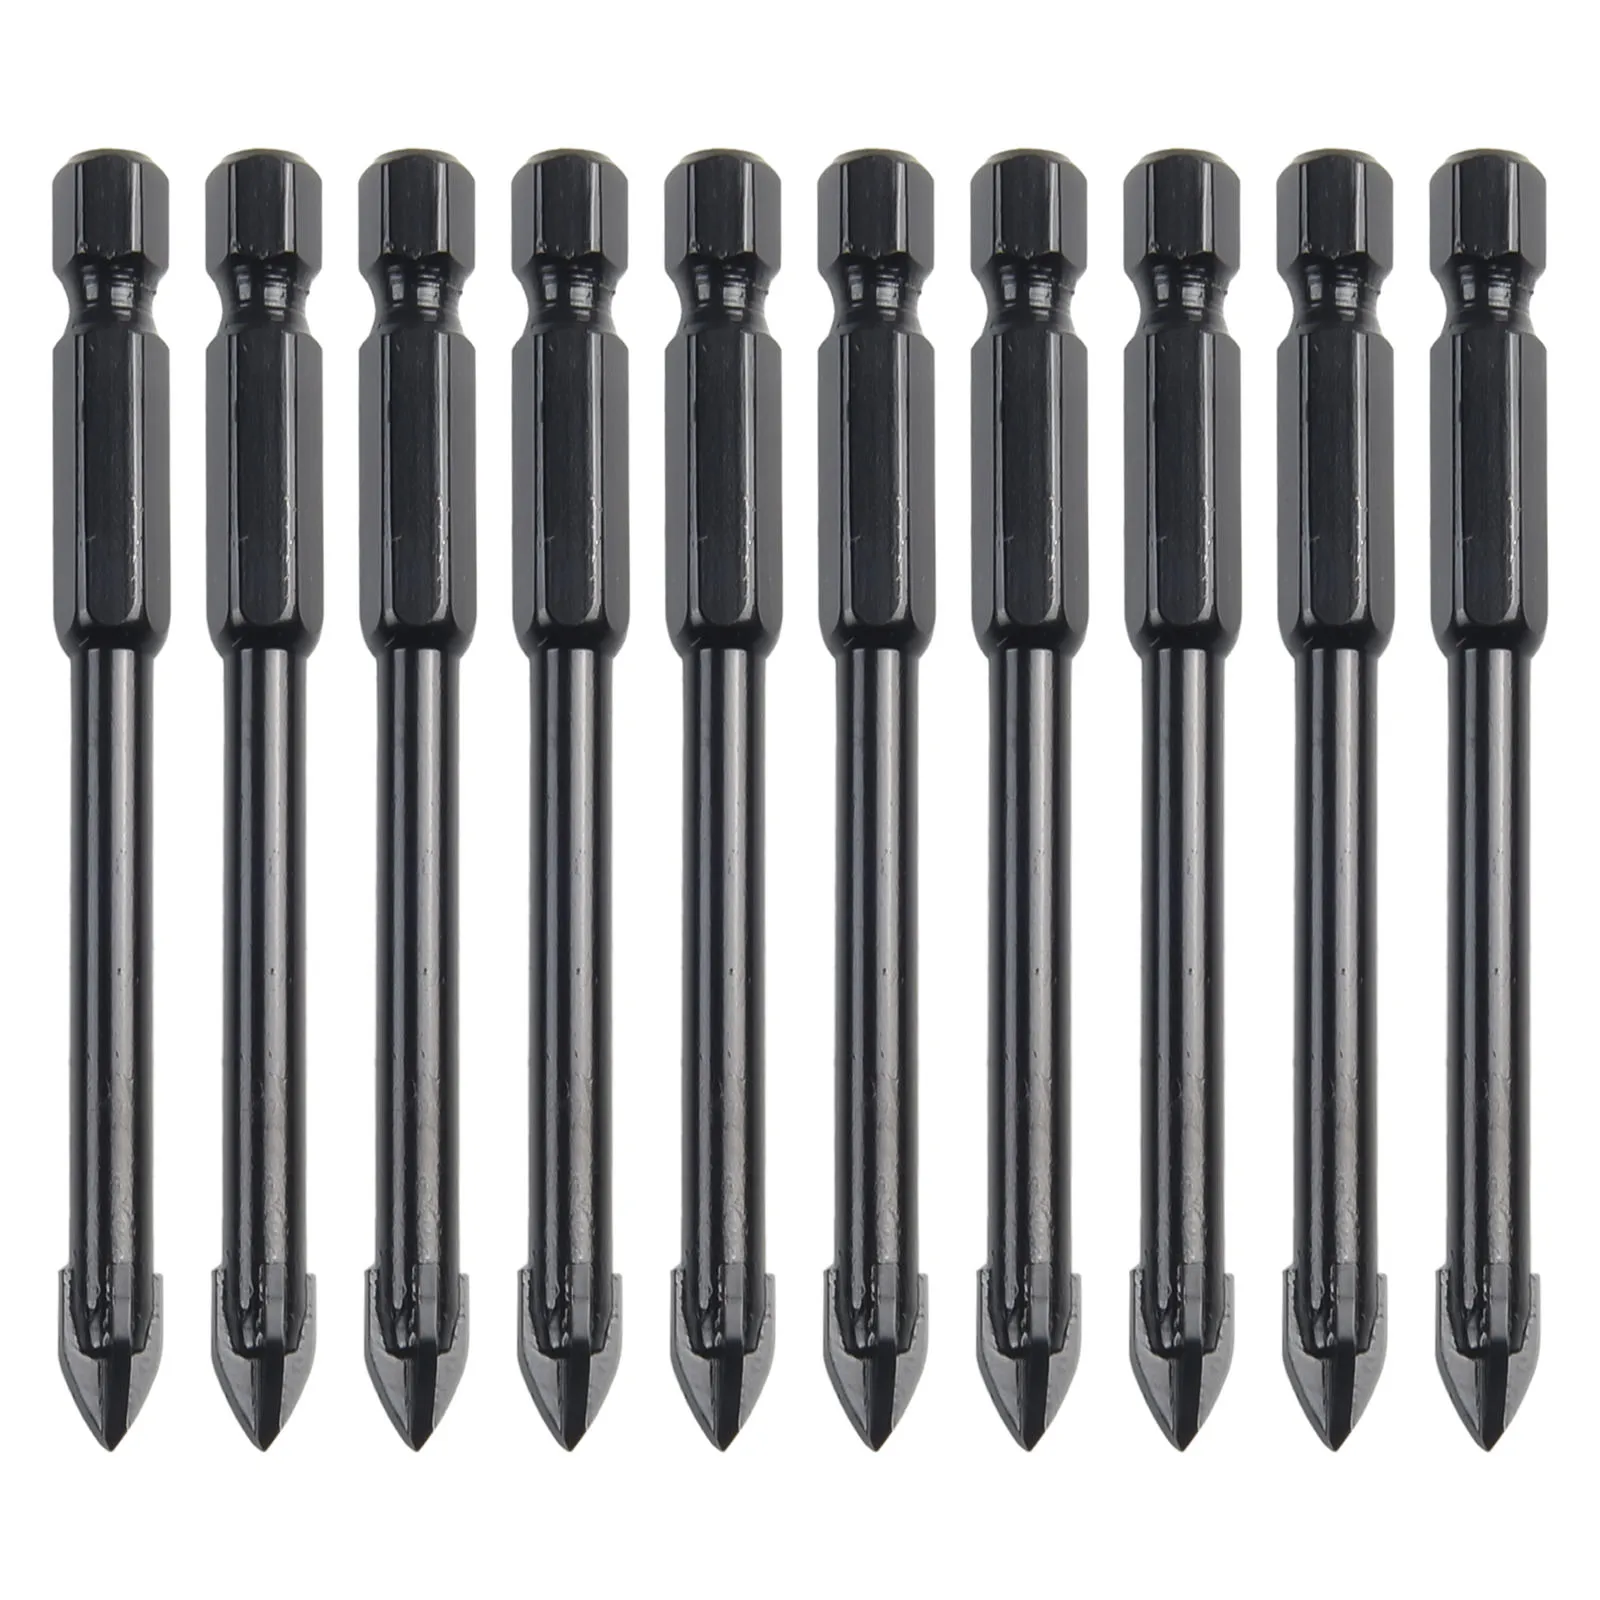 

10pcs Hex Shank Tungsten Carbide Drill Bits Tile Porcelain Drill Bit For Marble Ceramic Glass Brick Power Tools Parts